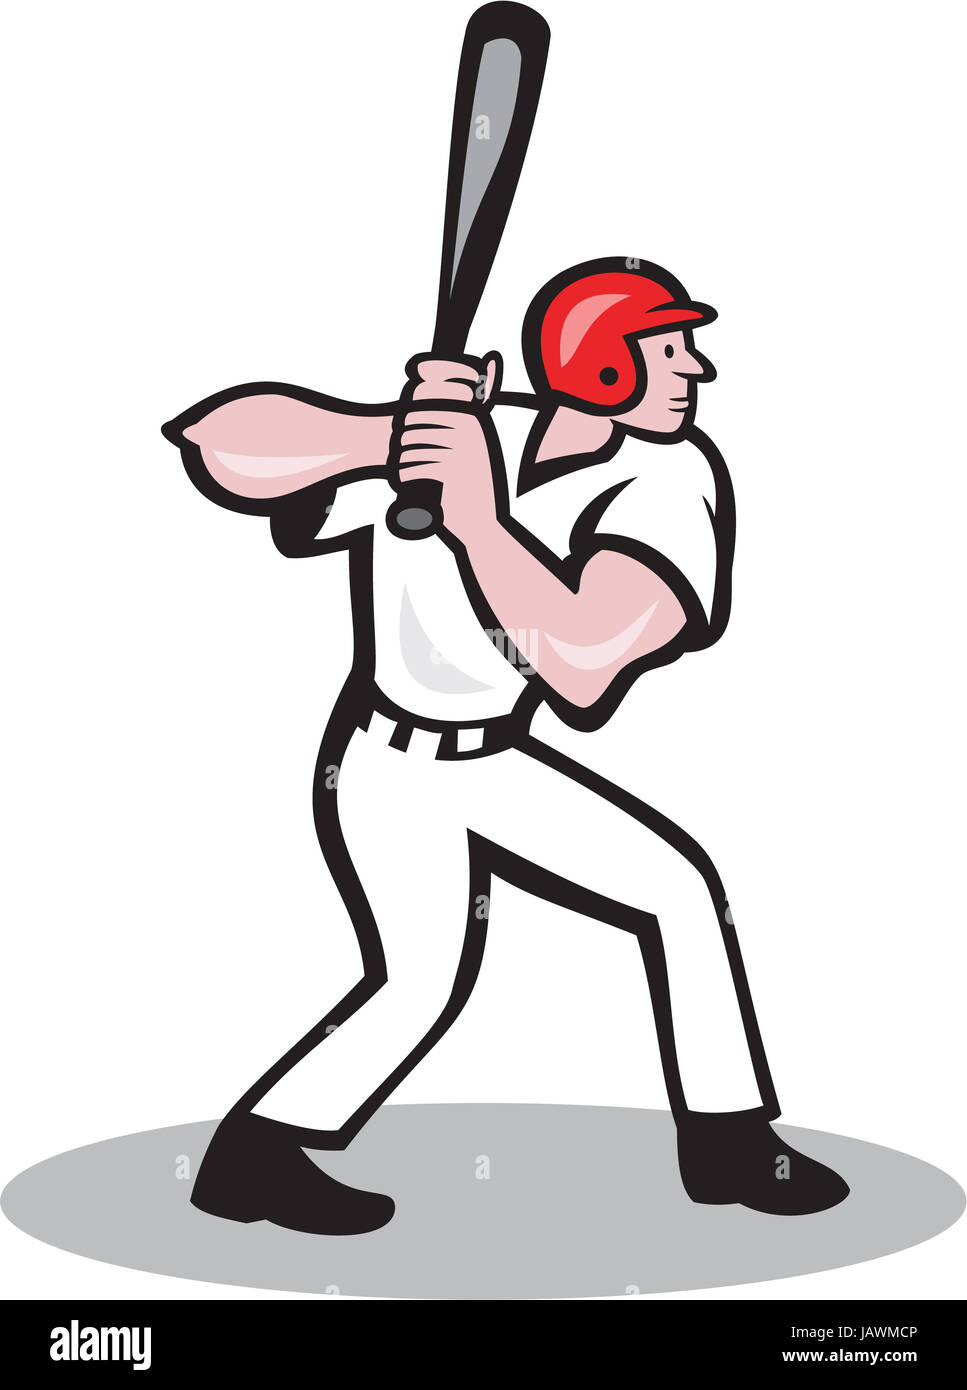 Illustration of a baseball player batter hitter batting with bat viewed from side done in cartoon style isolated on white background. Stock Photo